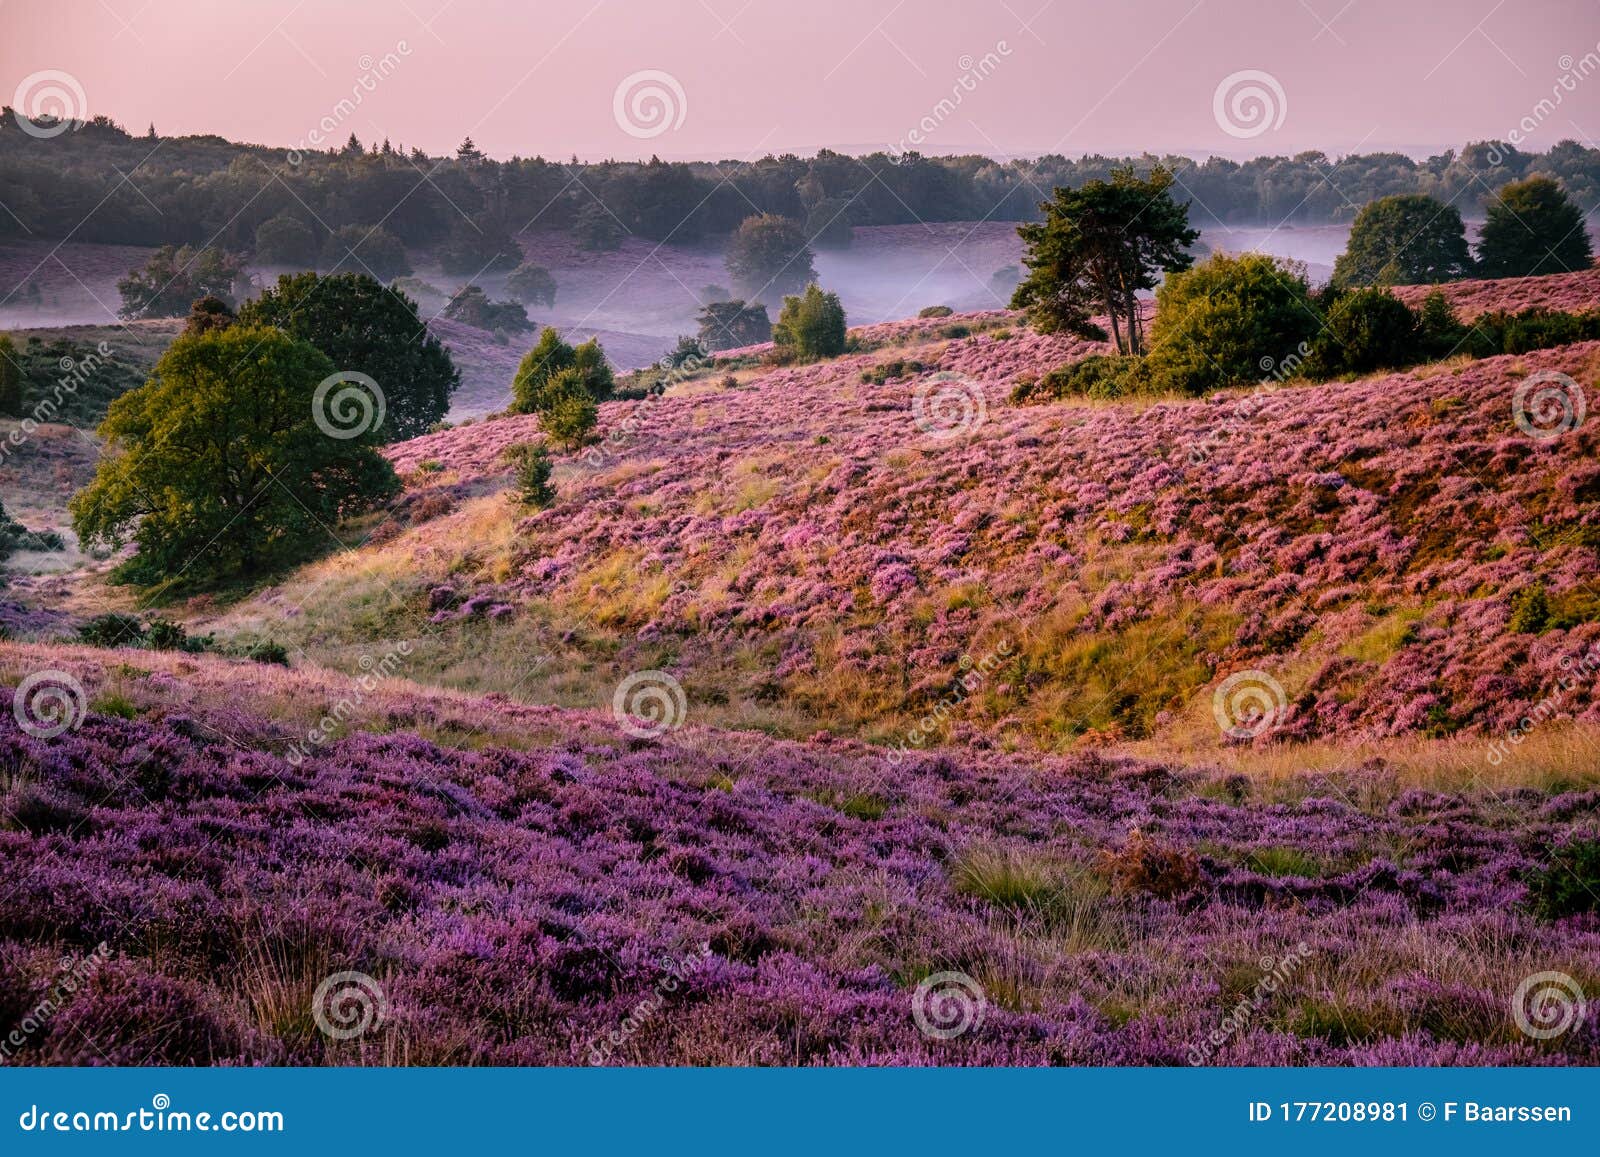 posbank national park veluwezoom, blooming heather fields during sunrise at the veluwe in the netherlands, purple hills